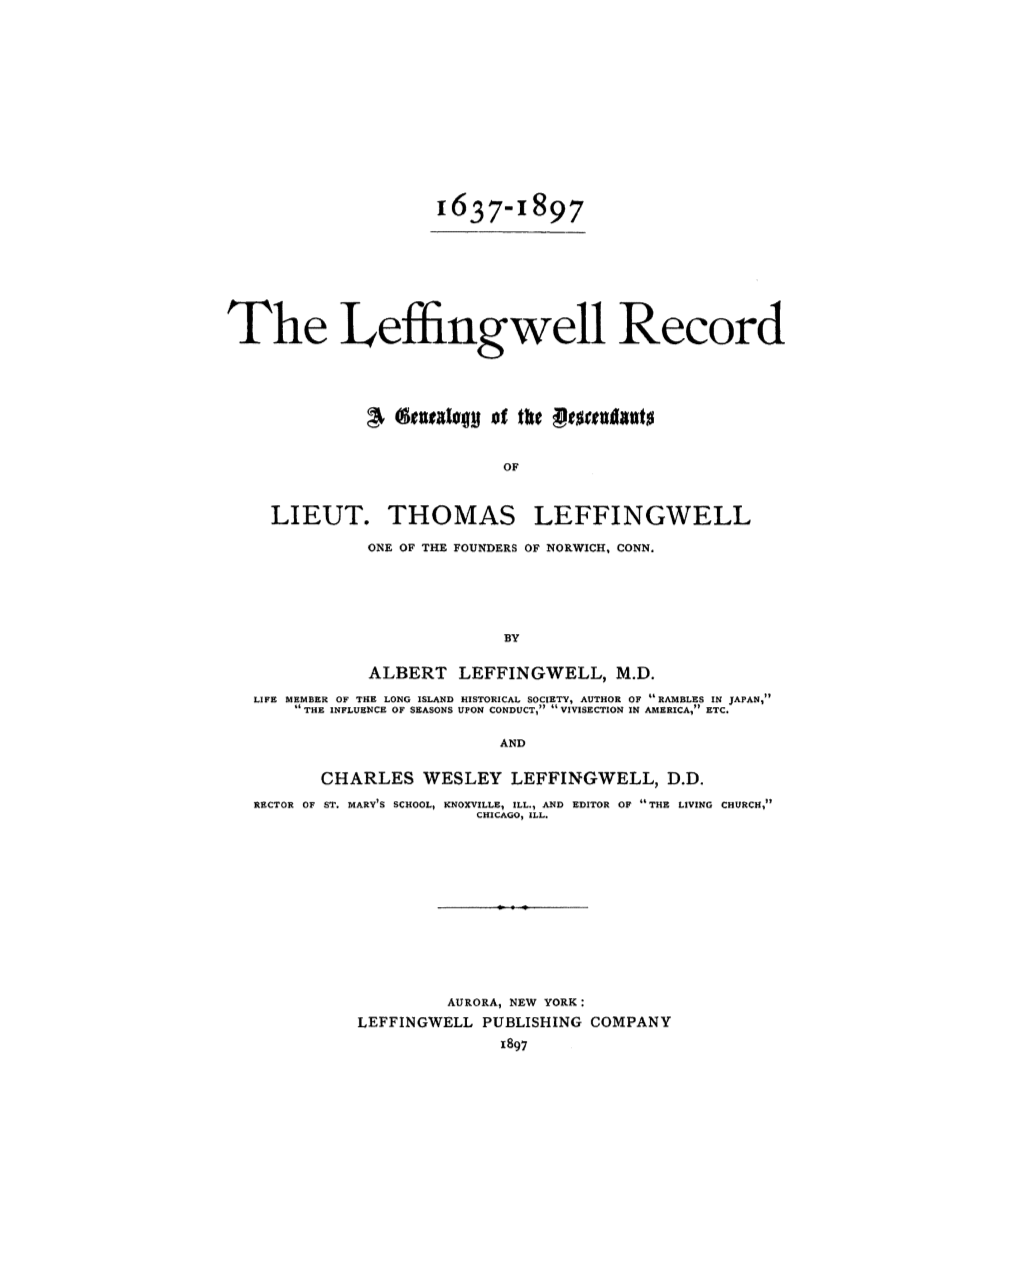 The Leffingwell Record